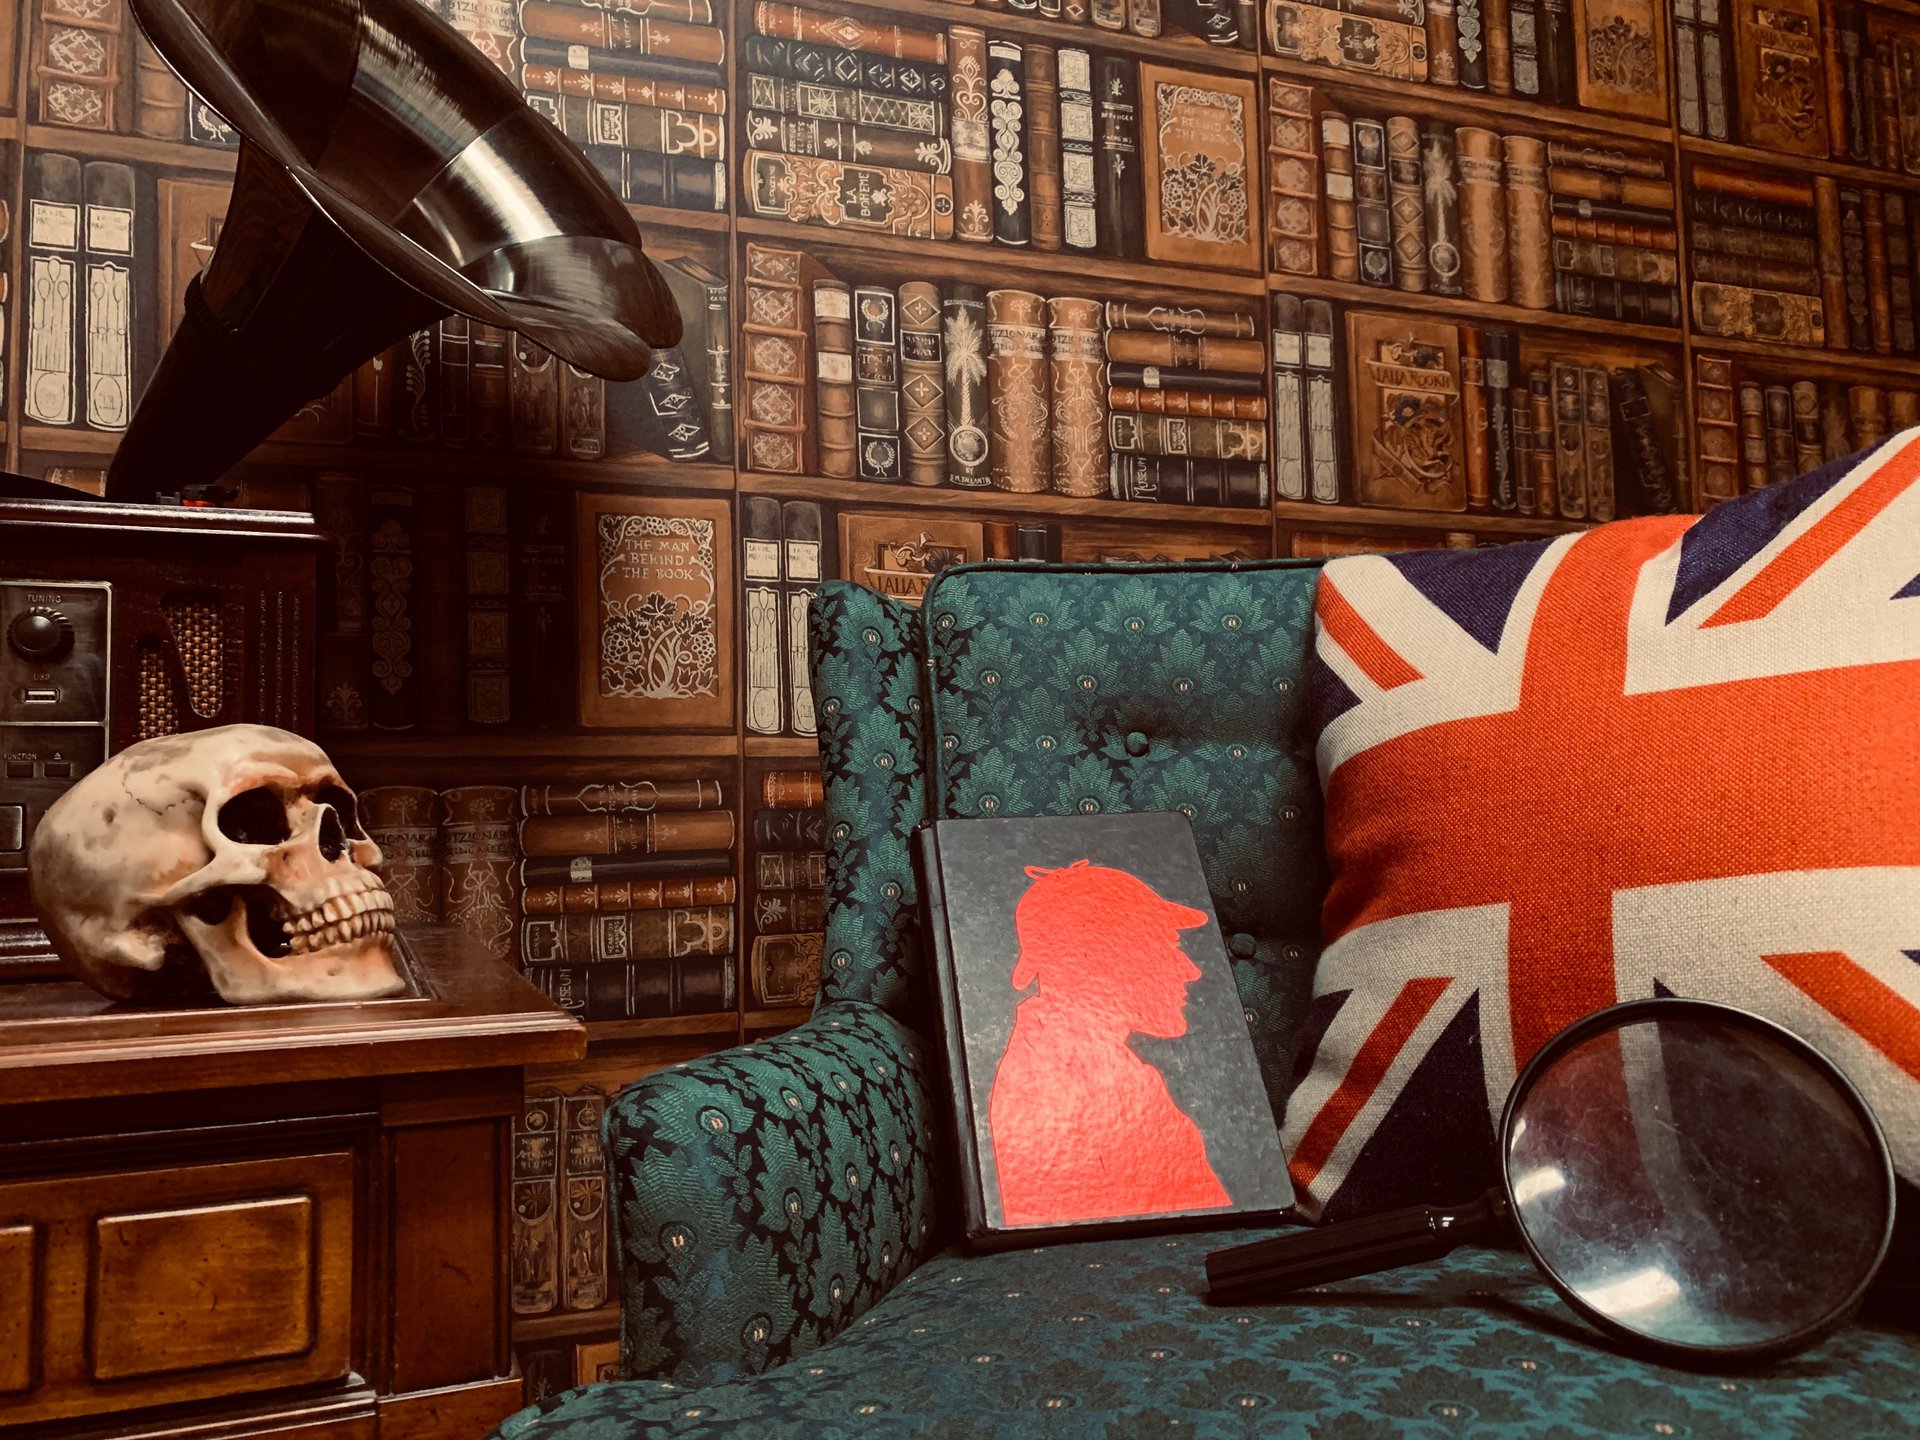 The Great Escape Room Sherlock Holmes' Library Private Group Activity in Chicago, IL The